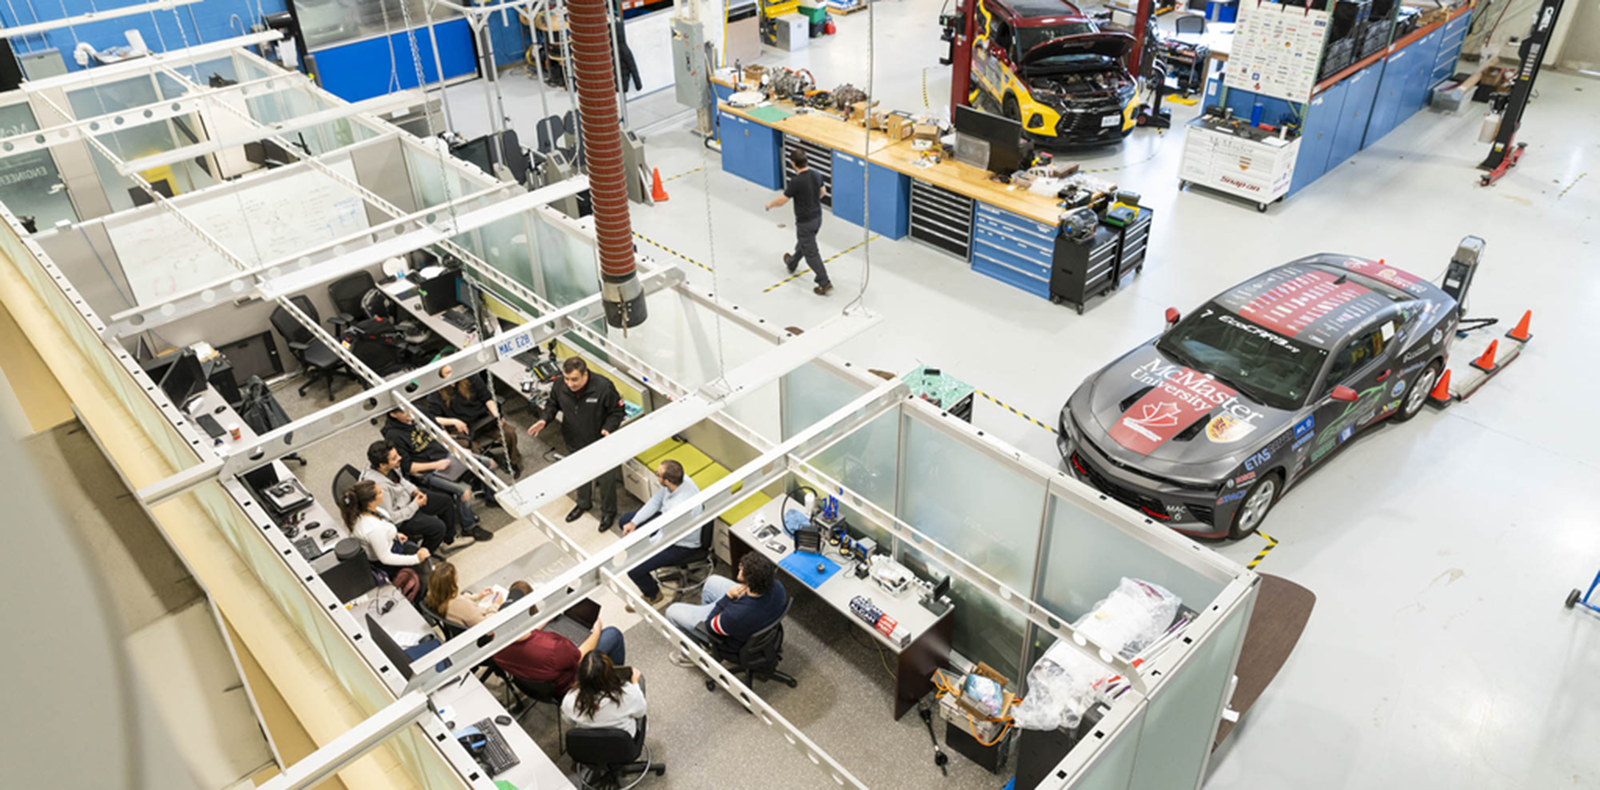 Overhead view of people working and learning in the McMaster Automotive Research Centre